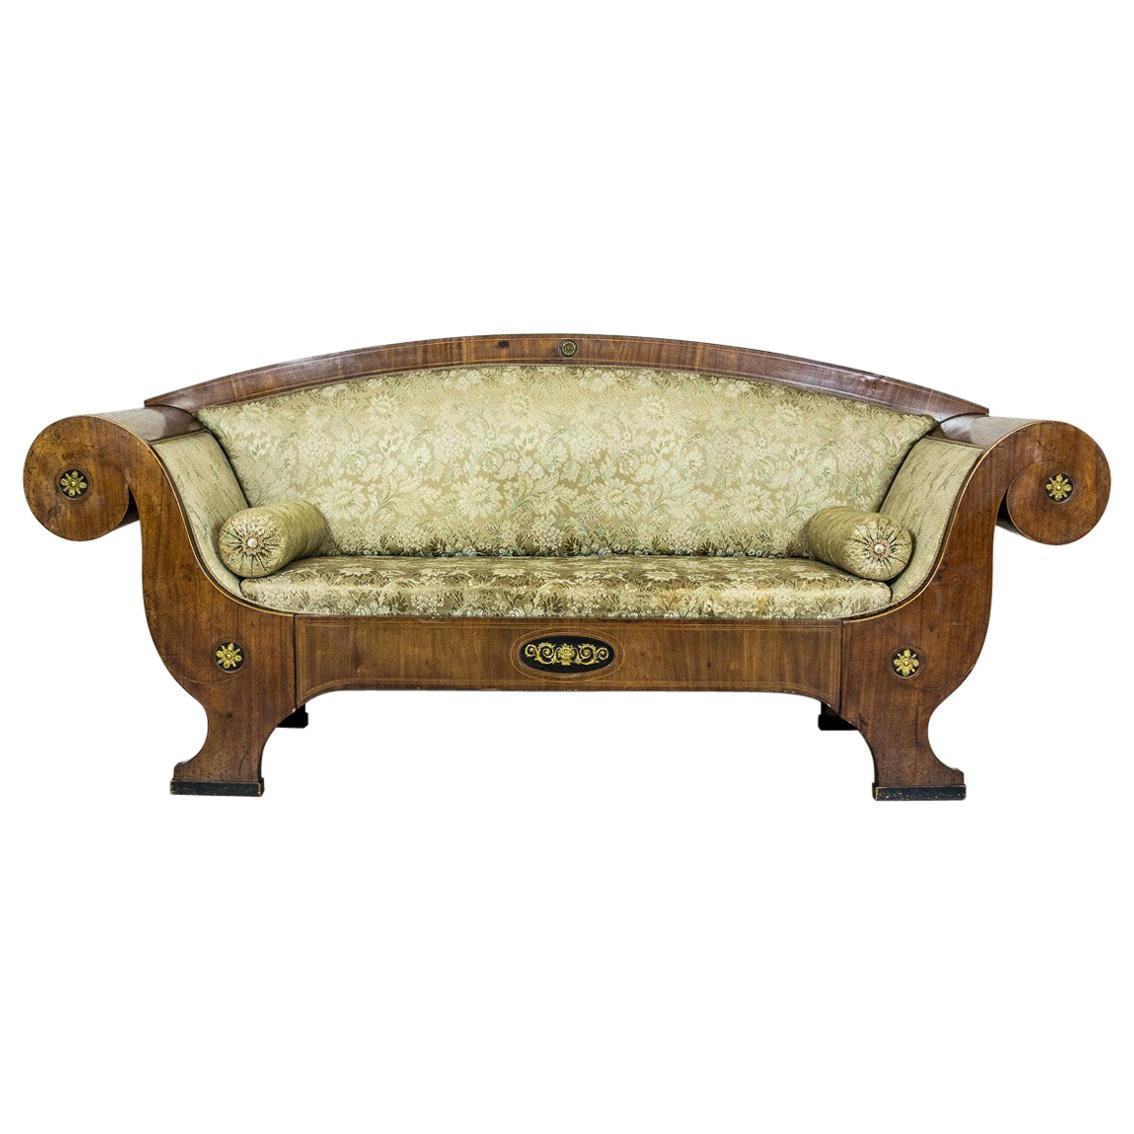 Antique Large  Biedermeier Sofa in Green with brass details, circa 1860 For Sale